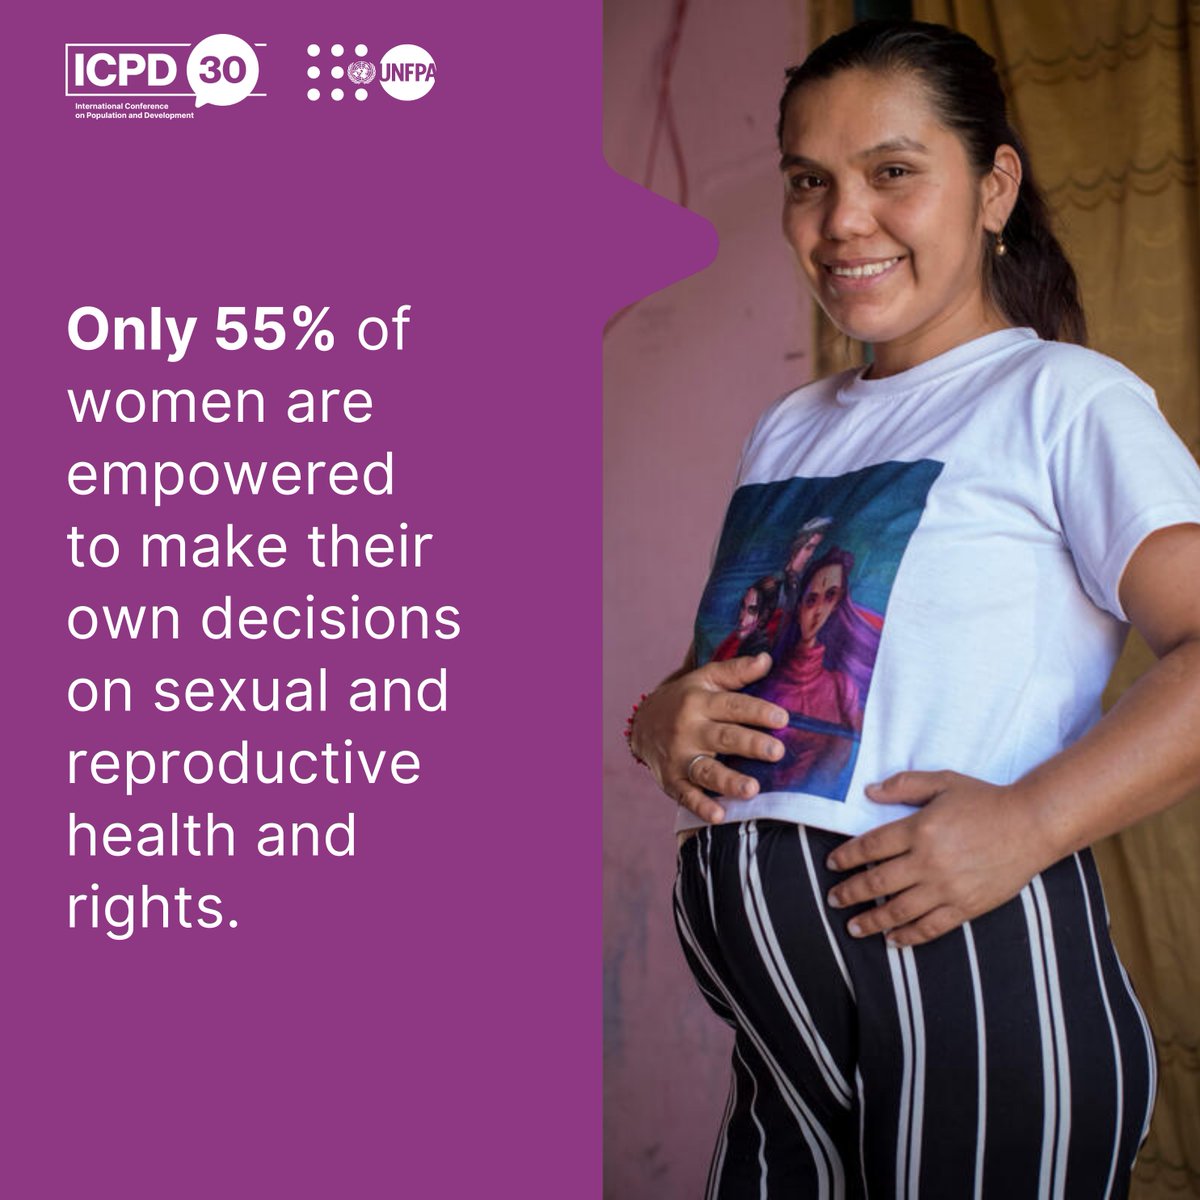 Millions of women are denied the right to make decisions over their sexual and reproductive health. ⛔ This MUST stop. #StandUp4HumanRights and join @UNFPA—the @UN sexual and reproductive health agency—to say #MyHealthMyRight: unf.pa/whde #ICPD30